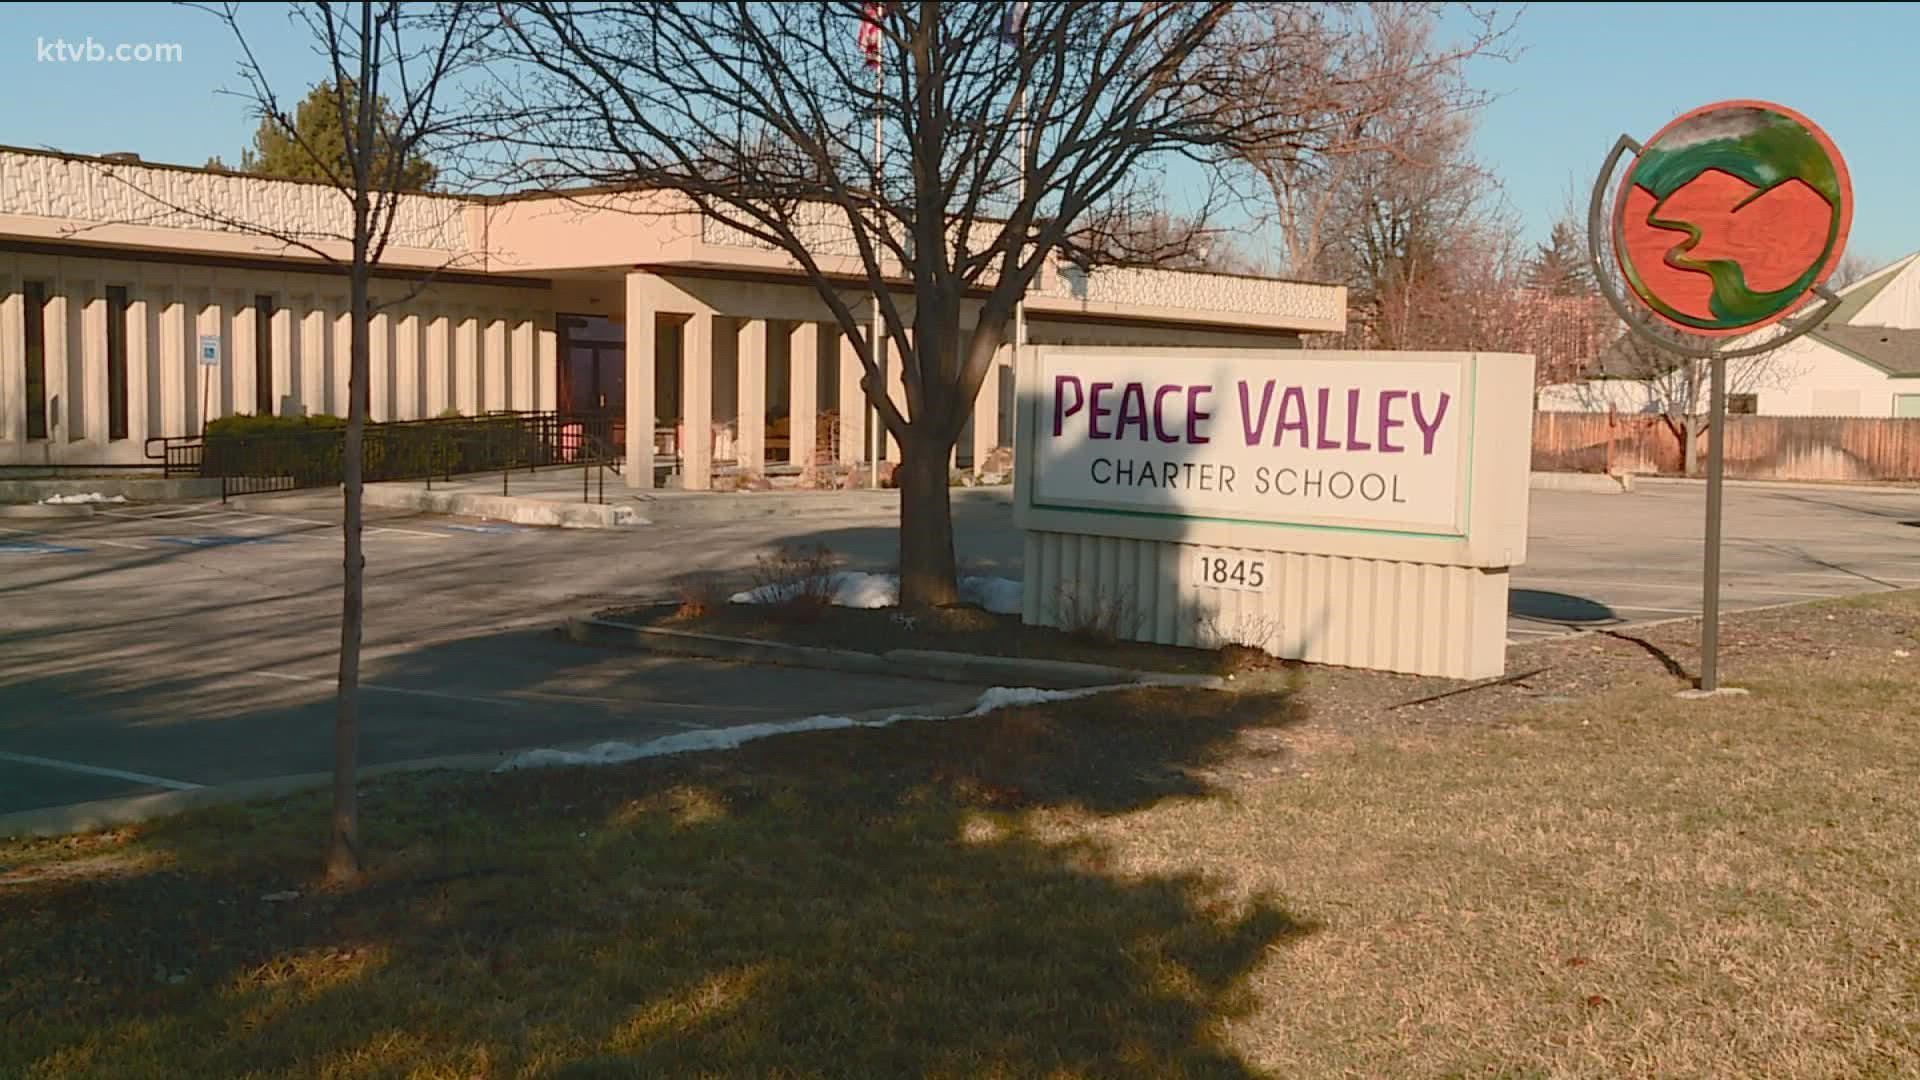 Anticipating staff shortages, Peace Valley Charter School in Boise made the decision to close Friday.